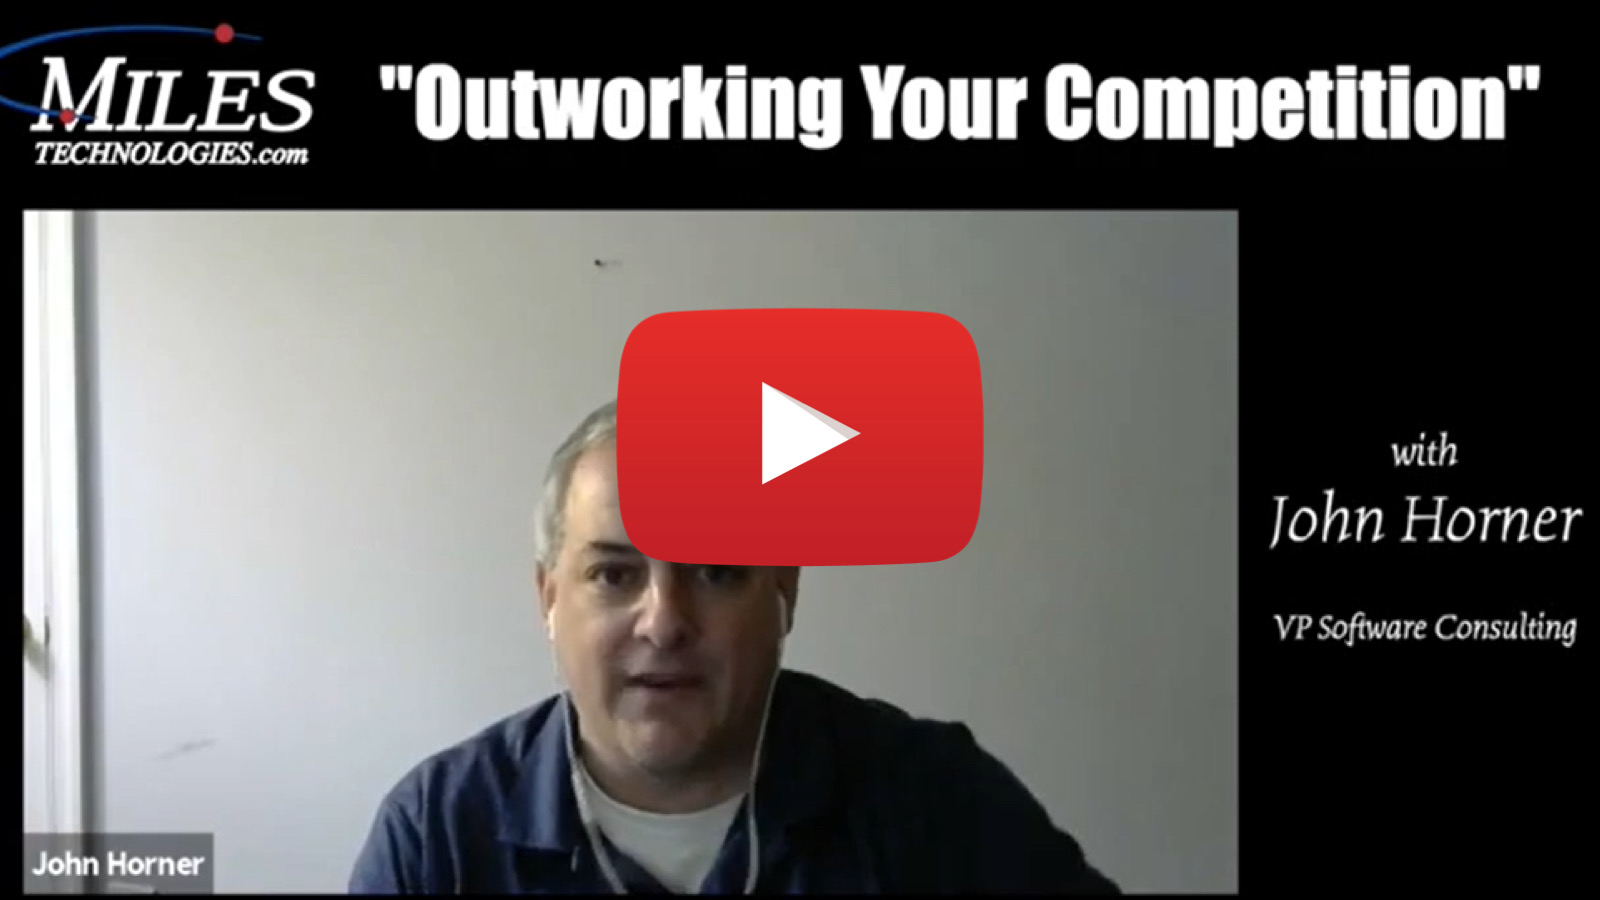 john horner discussing outworking your competition